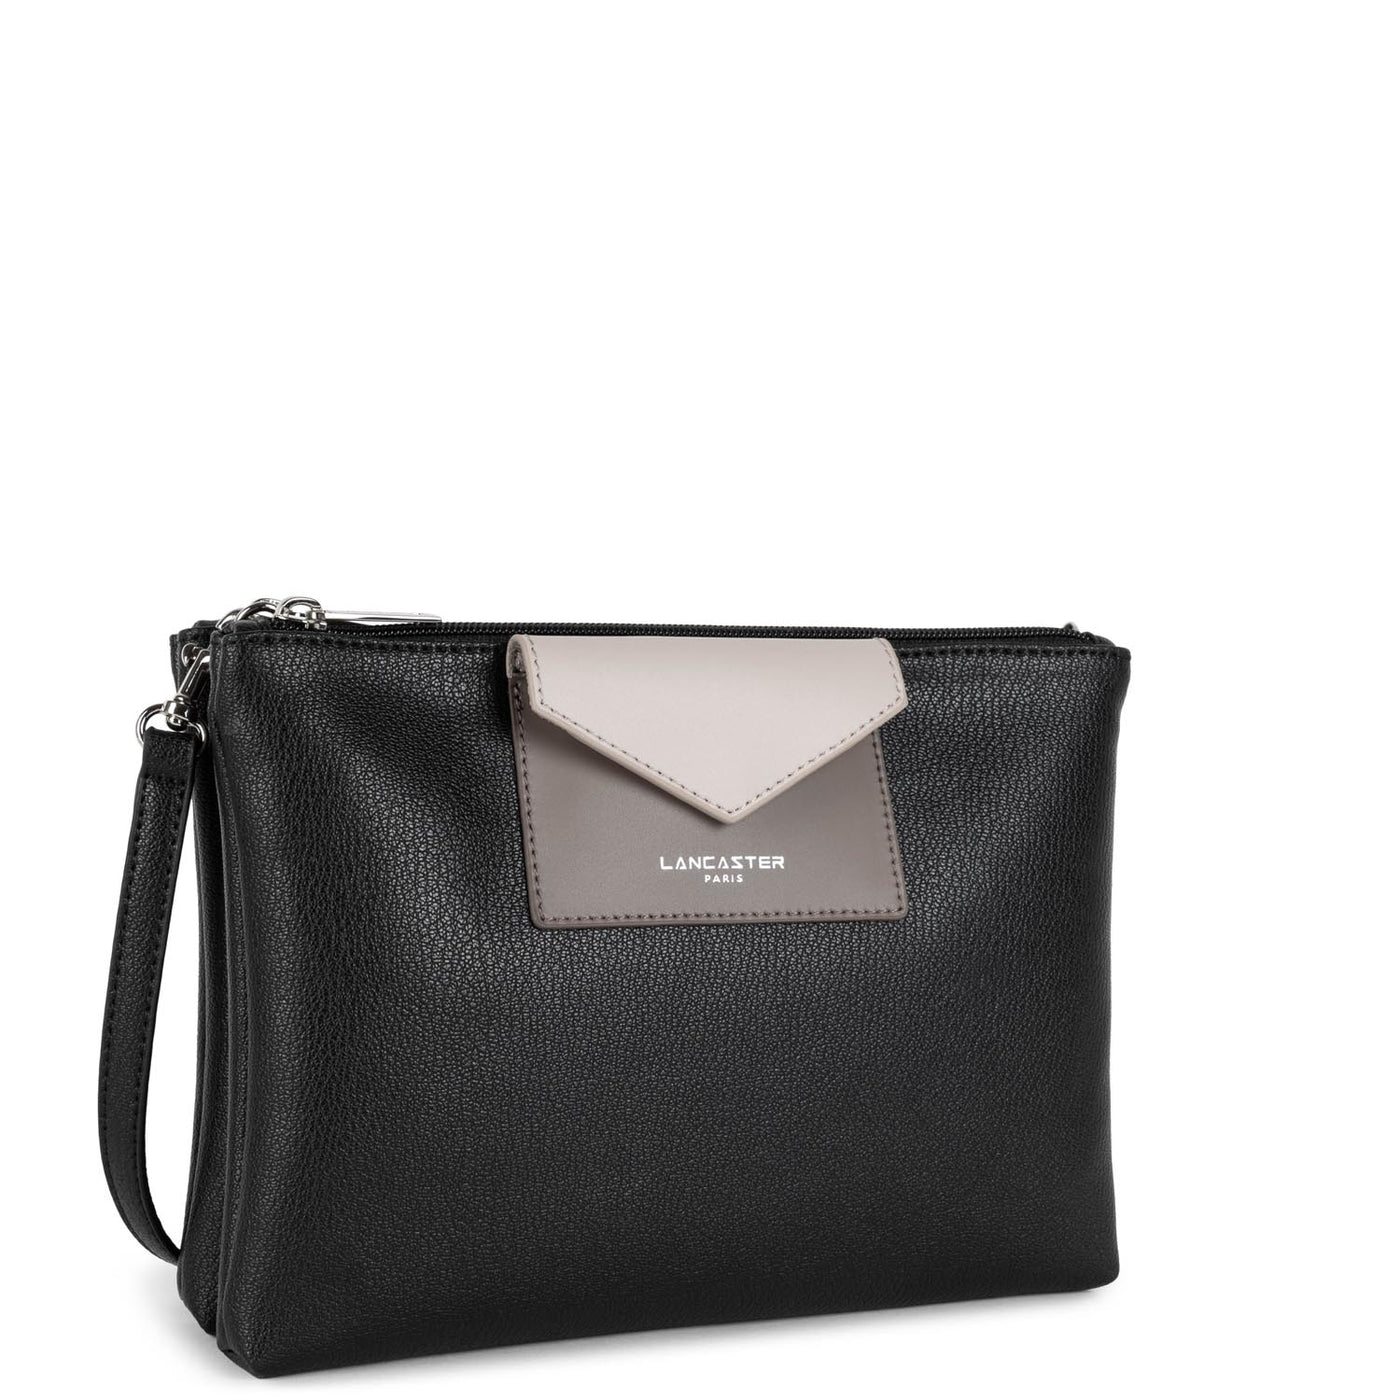 double clutch - maya #couleur_noir-taupe-galet-ros